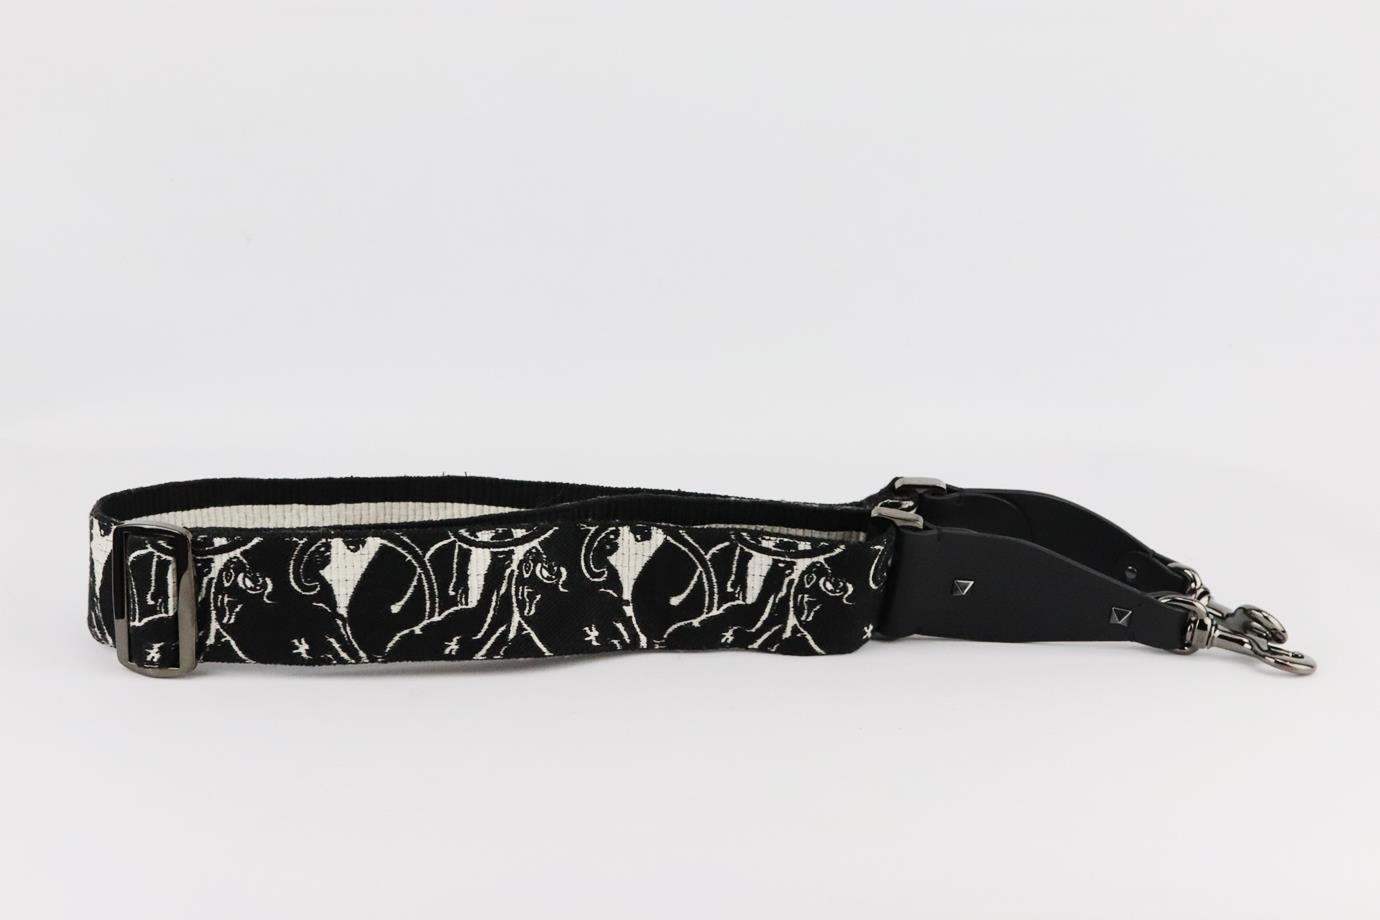 Valentino Garavani two-tone embroidered canvas and leather bag strap. Black and white. Lobster clasp fastening at base. Does not come with box or dustbag. Max. Length: 51 in. Min. Length: 34 in. Width: 2 in. Very good condition - No sign of wear;